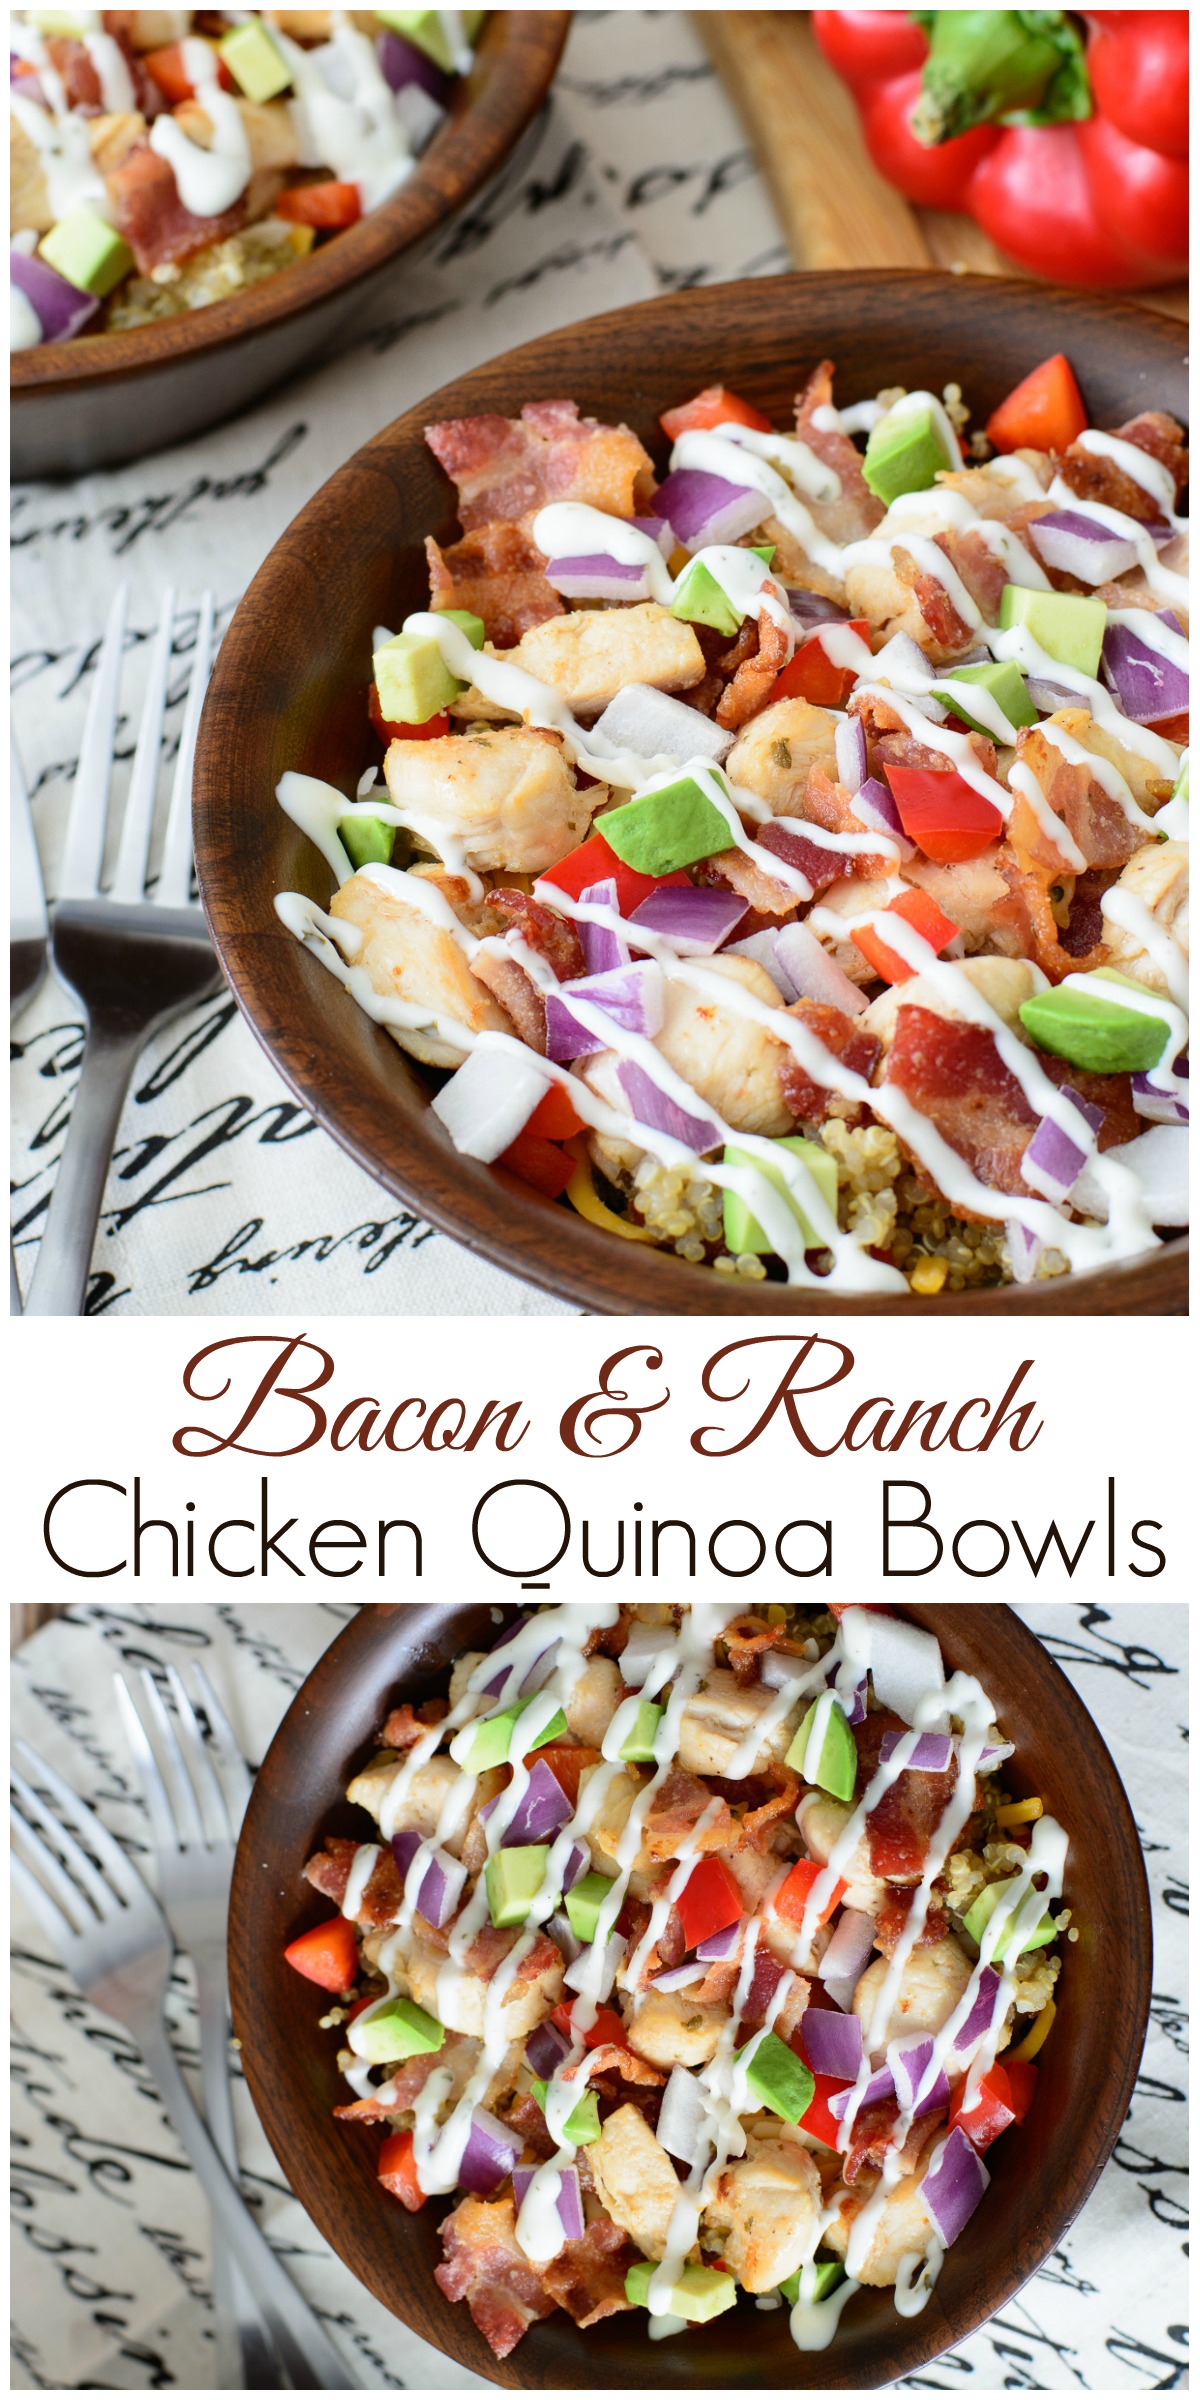 Bacon & Ranch Chicken Quinoa Bowls -- easy to make, naturally gluten-free and full of robust flavor. This delicious lunch bowl is a healthy alternative to fast food and you are sure to love every bite!